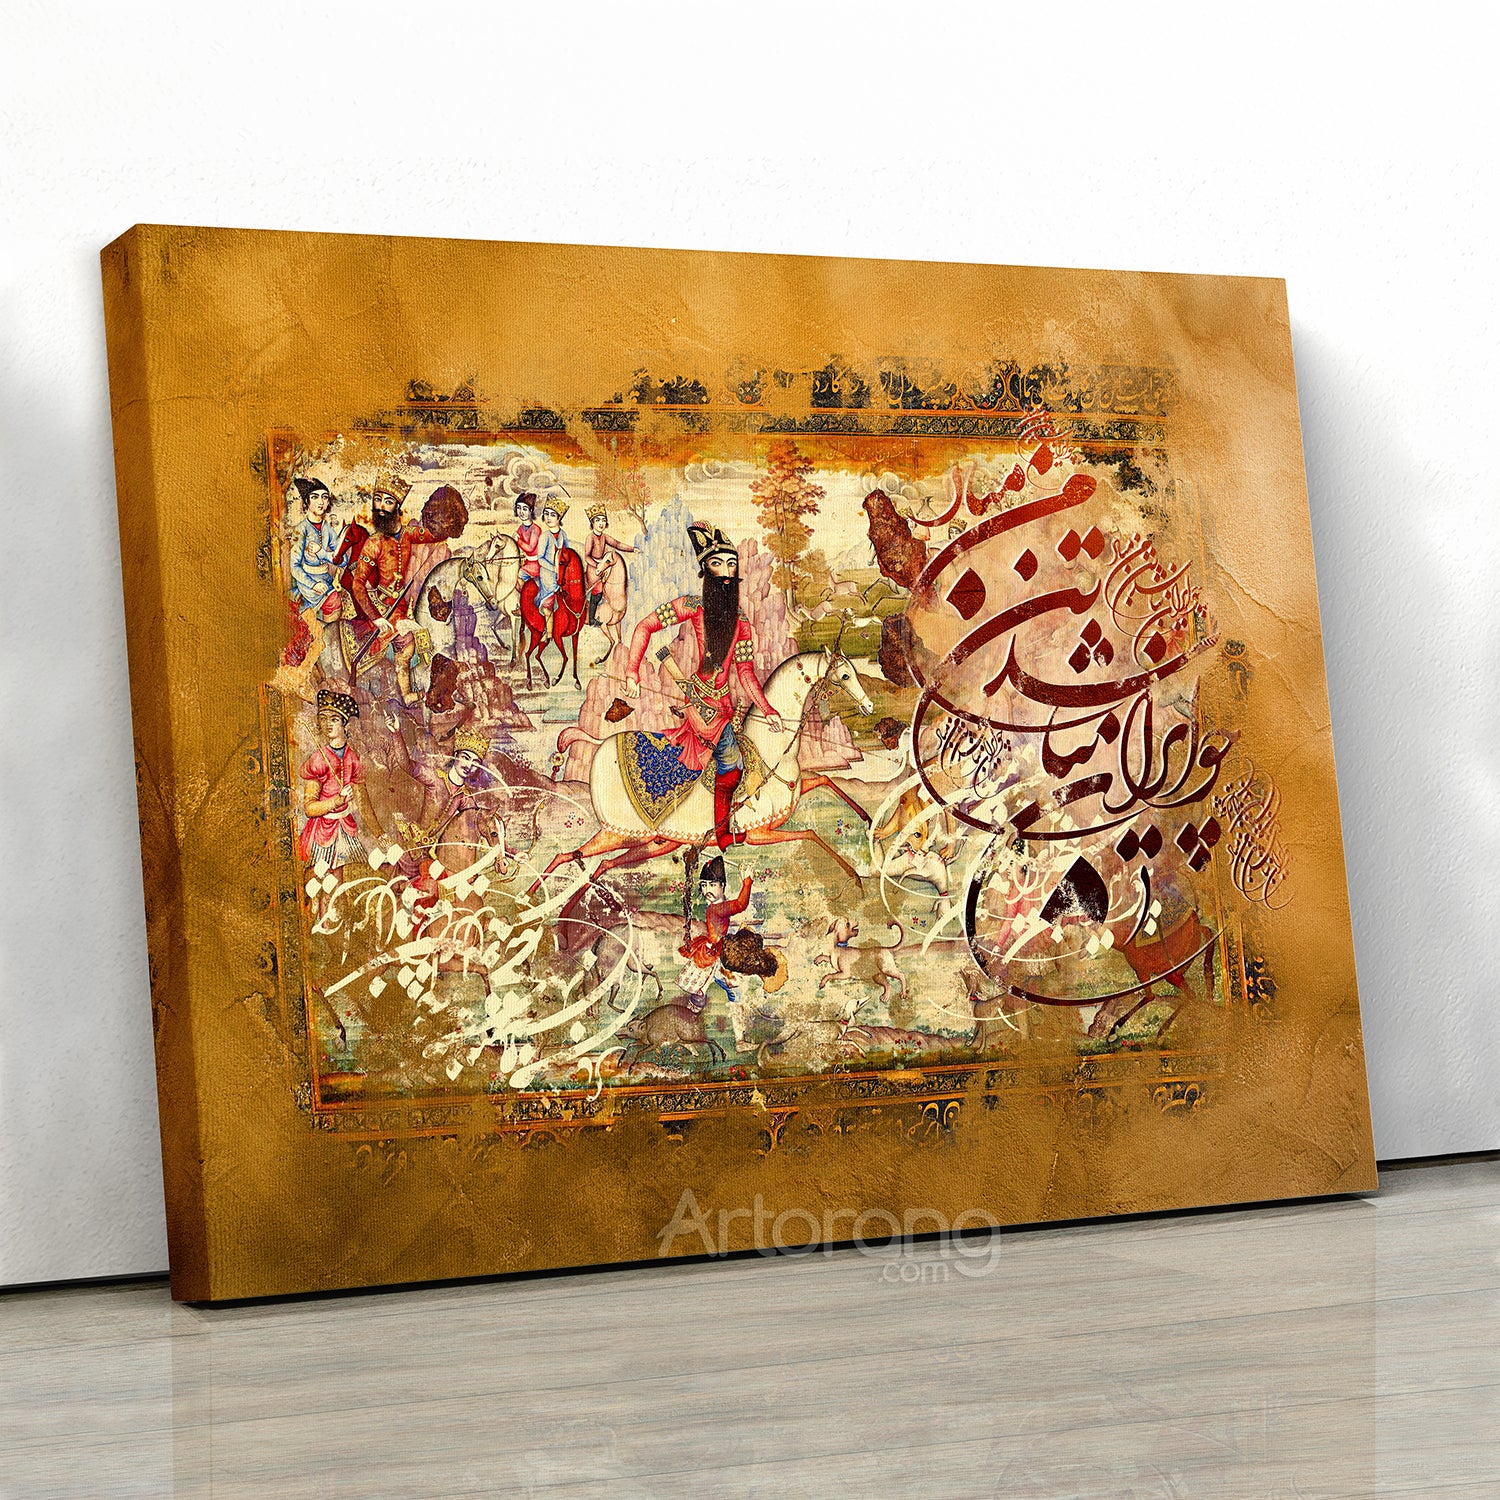 Fath-Ali Shah Qajar miniature and Persian calligraphy, Persian gallery style canvas, Persian gift